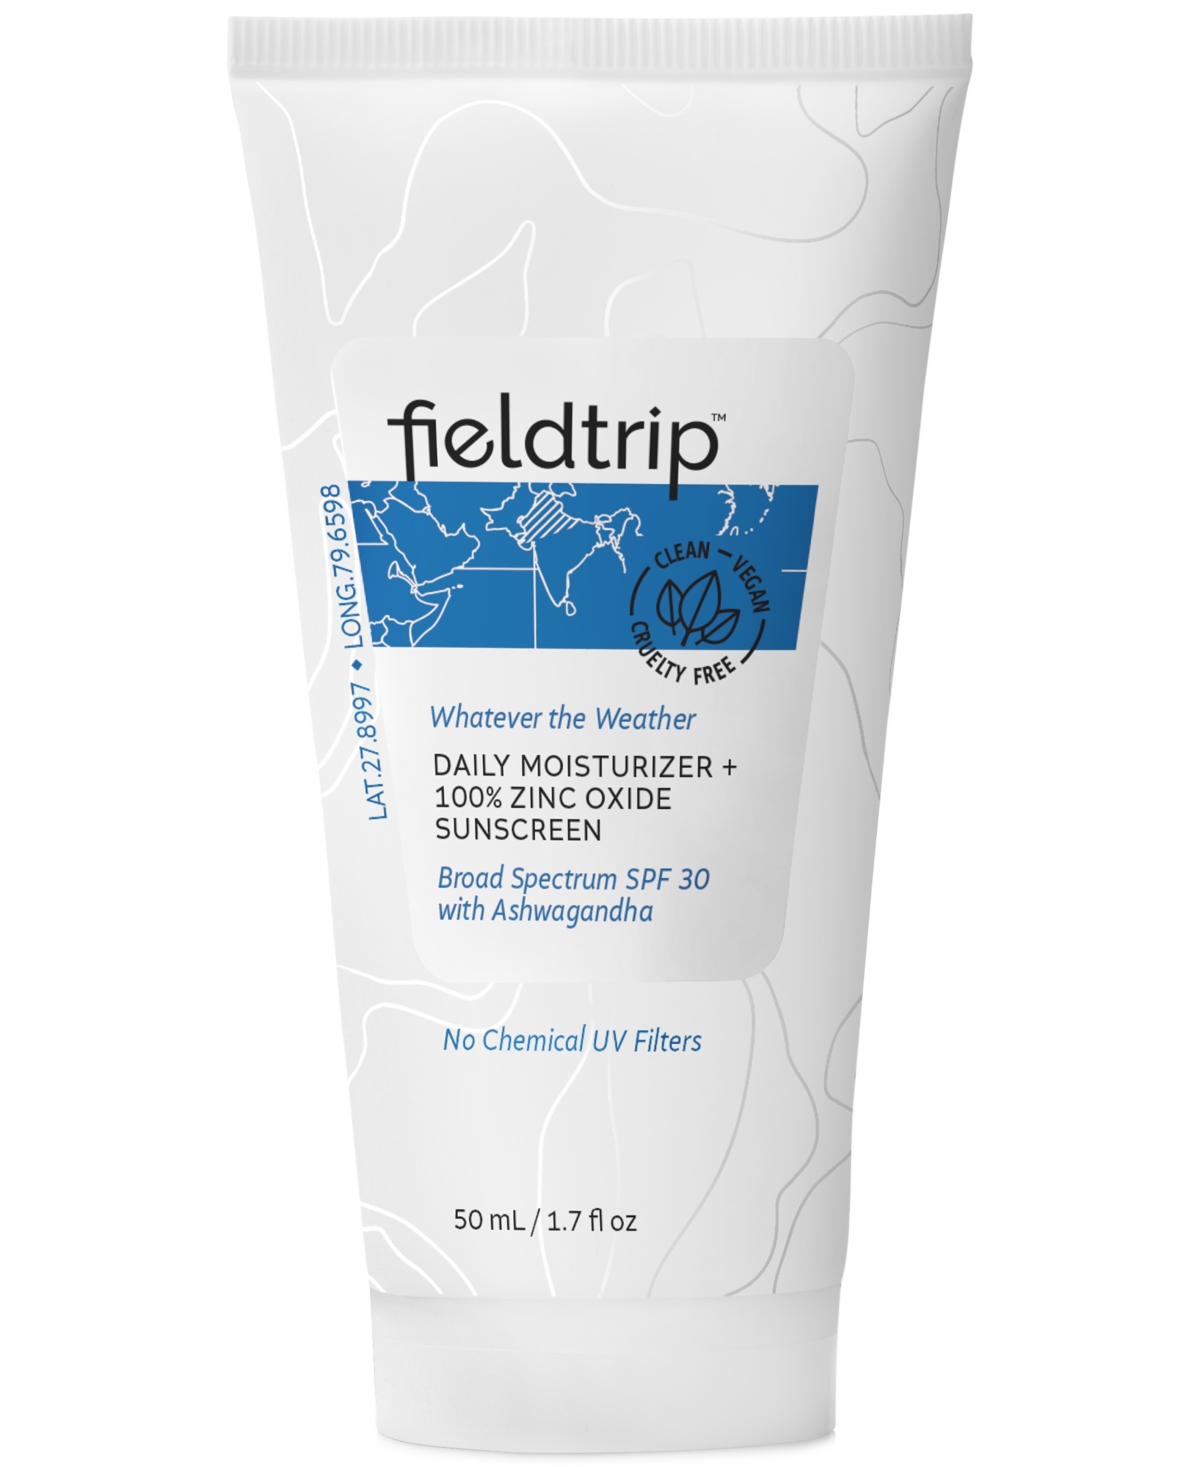 Whatever The Weather 2-In-1 Daily Moisturizer, 1.7 oz.